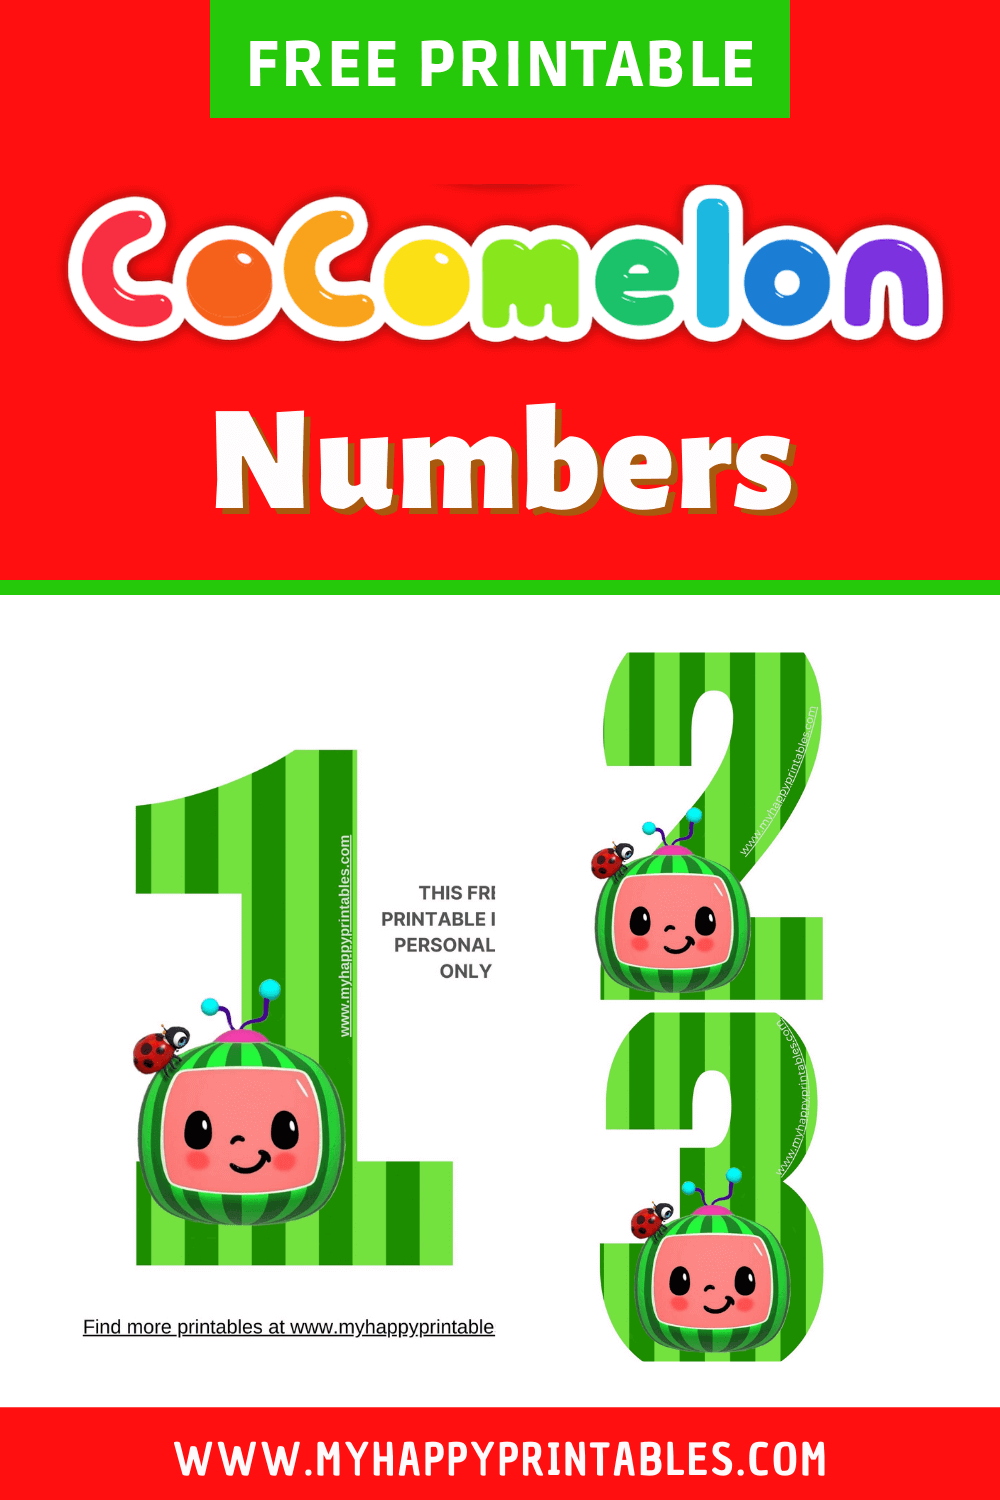 free-printable-cocomelon-numbers-my-happy-printables